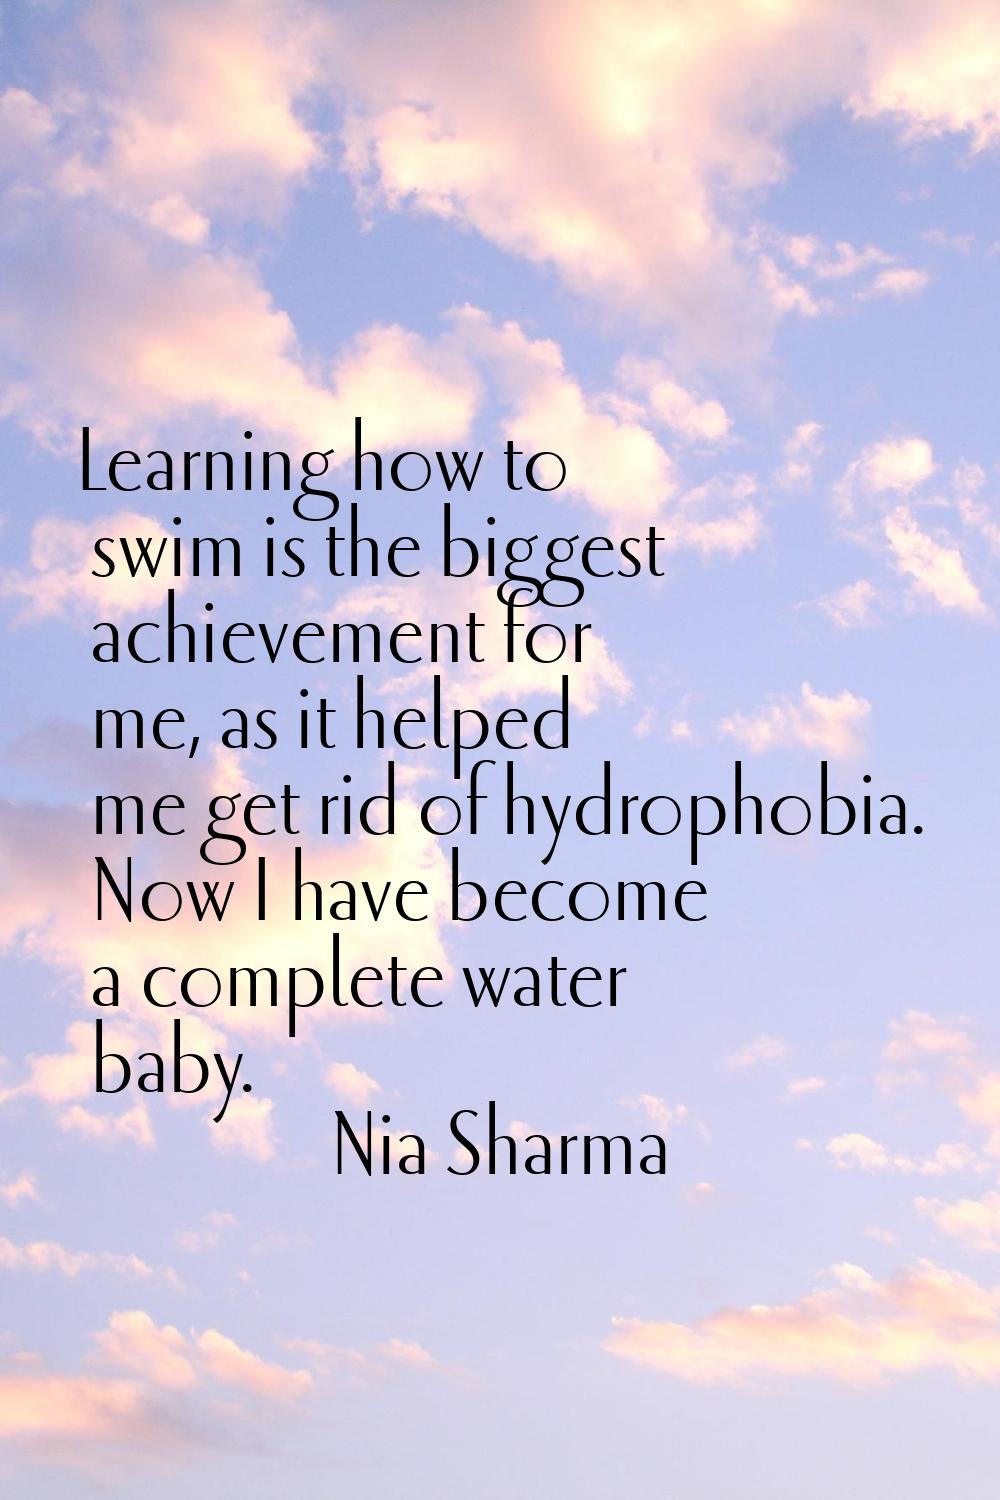 Learning how to swim is the biggest achievement for me, as it helped me get rid of hydrophobia. Now